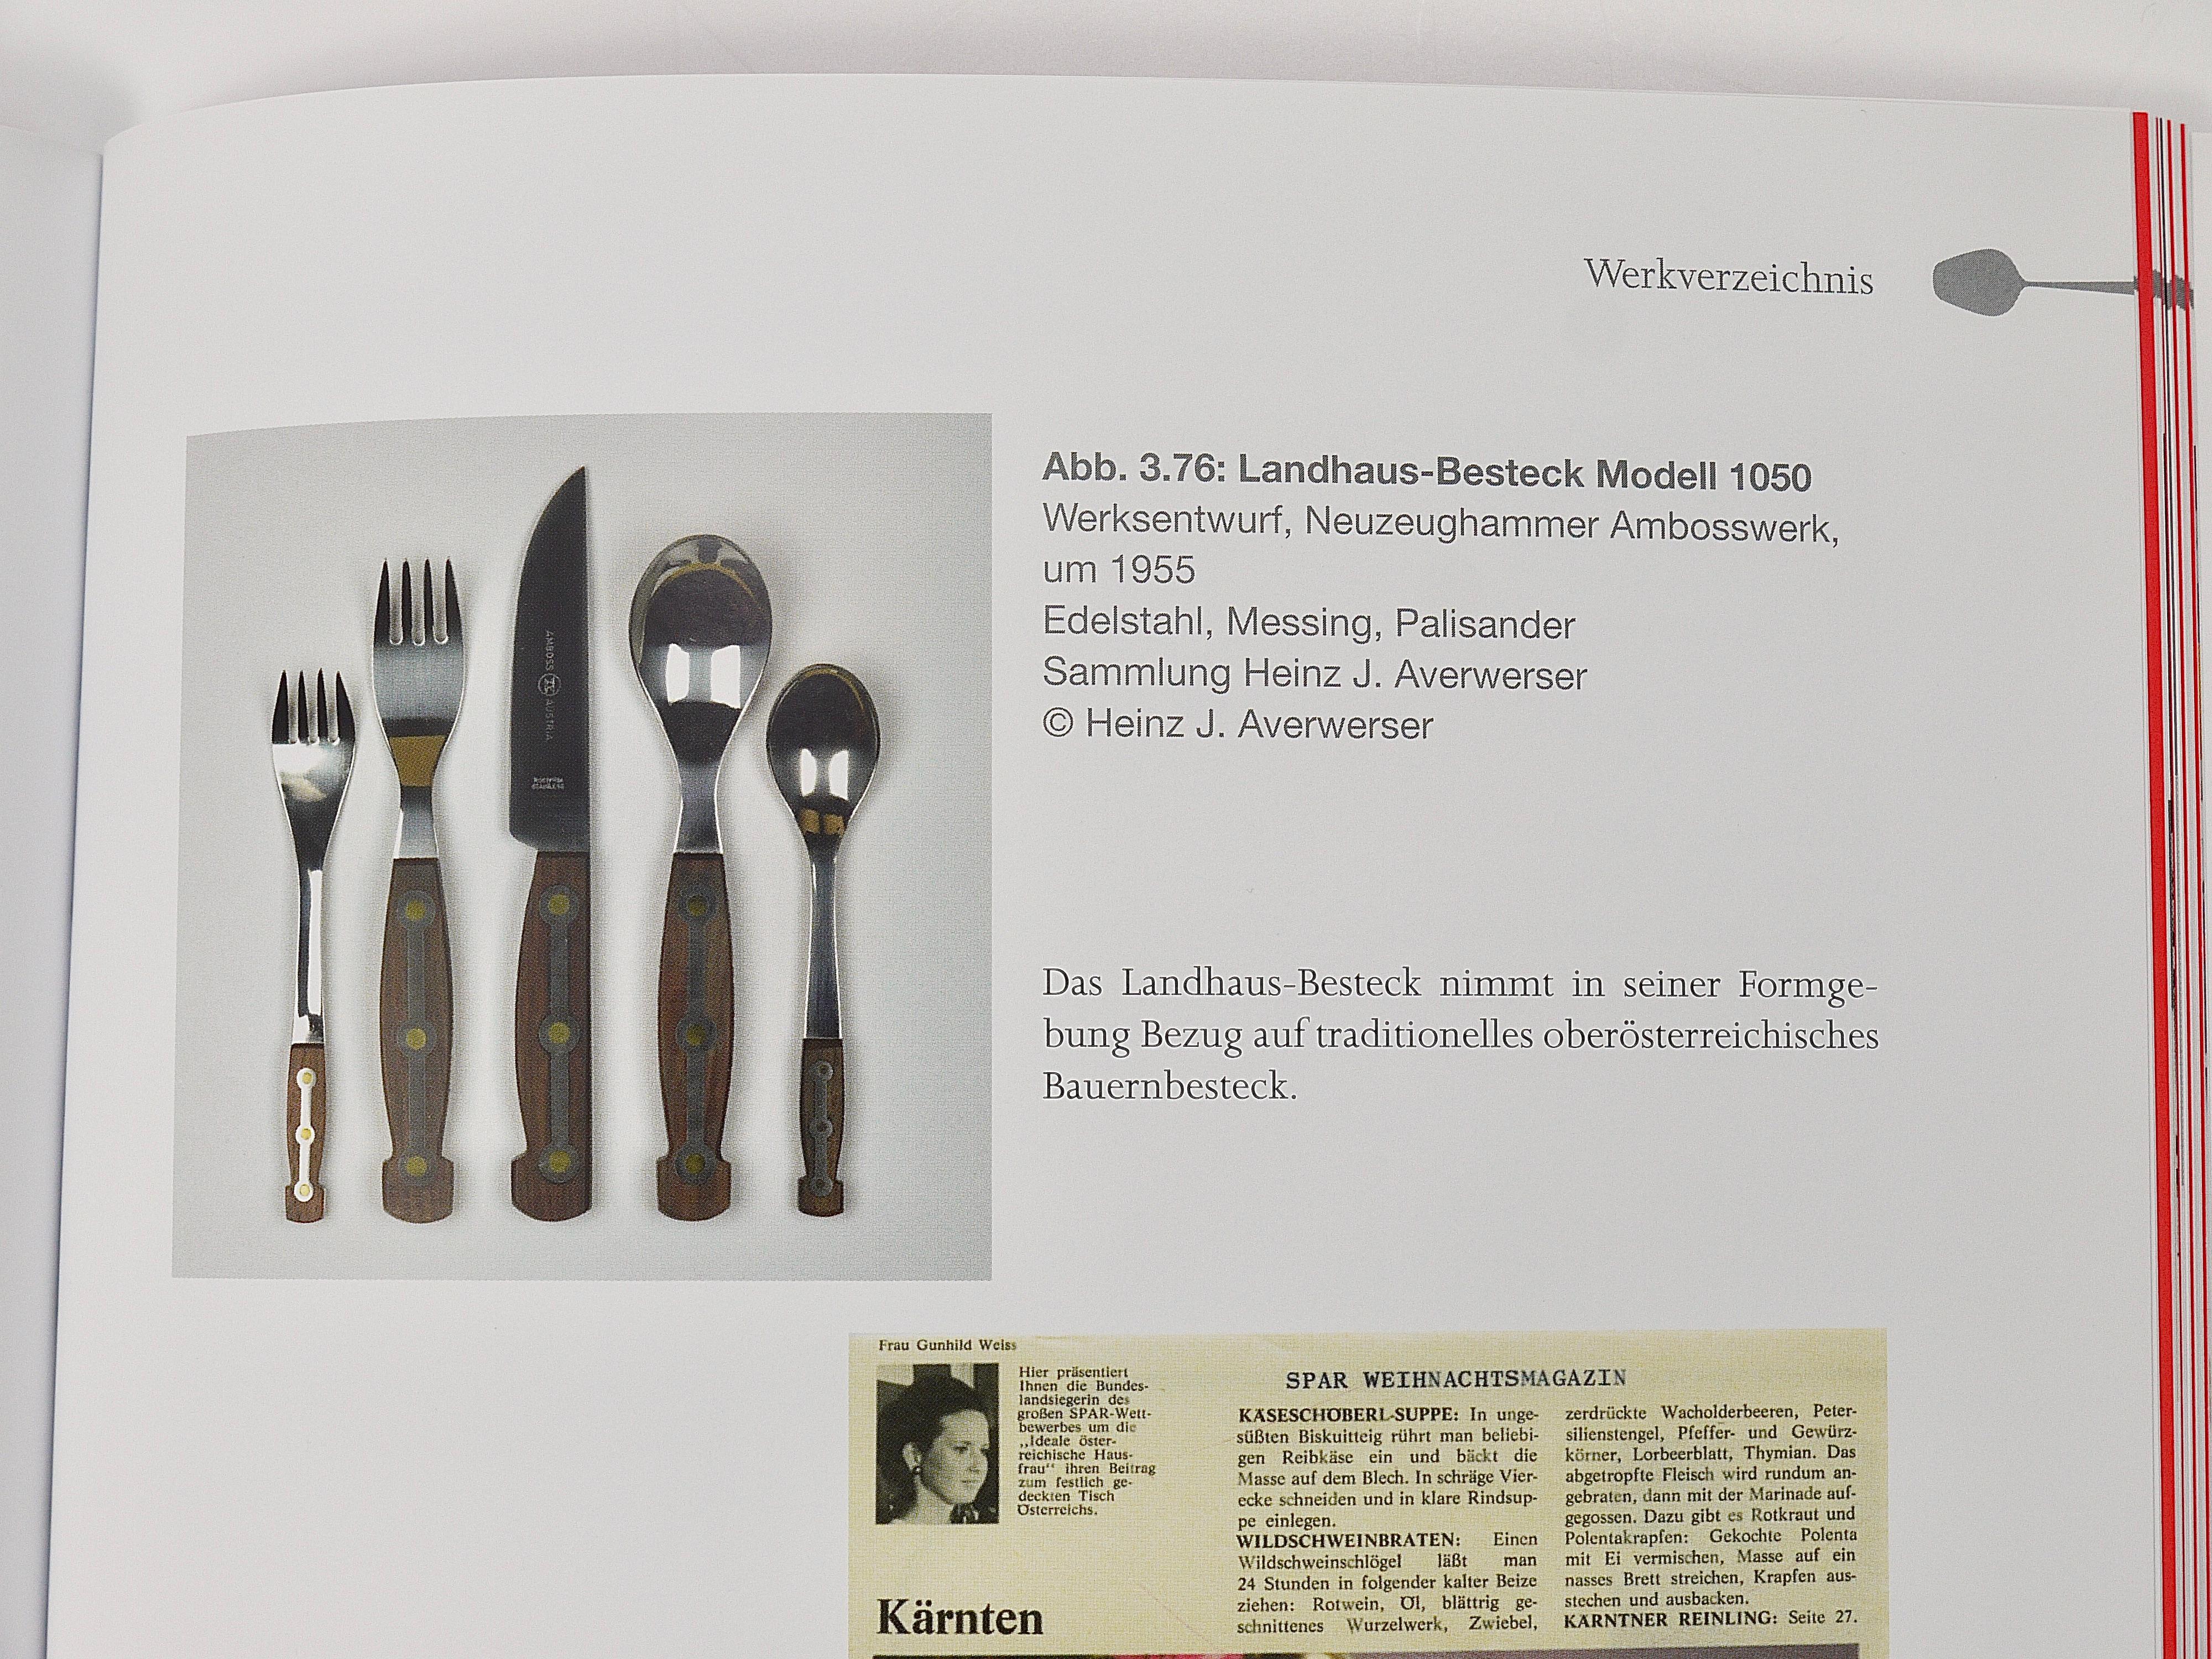 Two Amboss 1050 Snack Board Fork and Knife Sets, Austria, 1960s For Sale 8